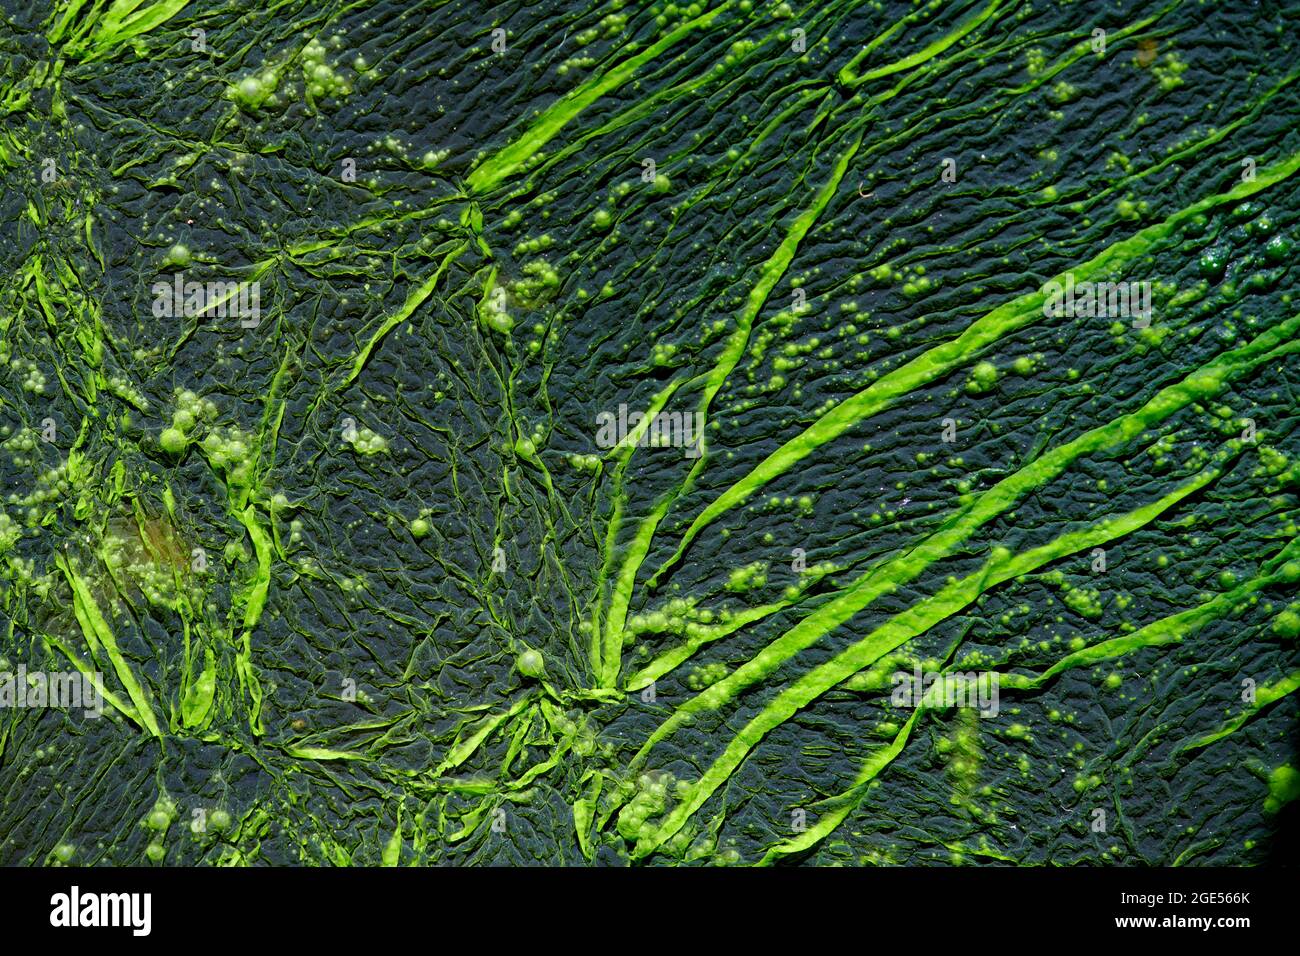 Closeup of green coloured filiments of algae growing on surface of stagnant fresh water. Stock Photo